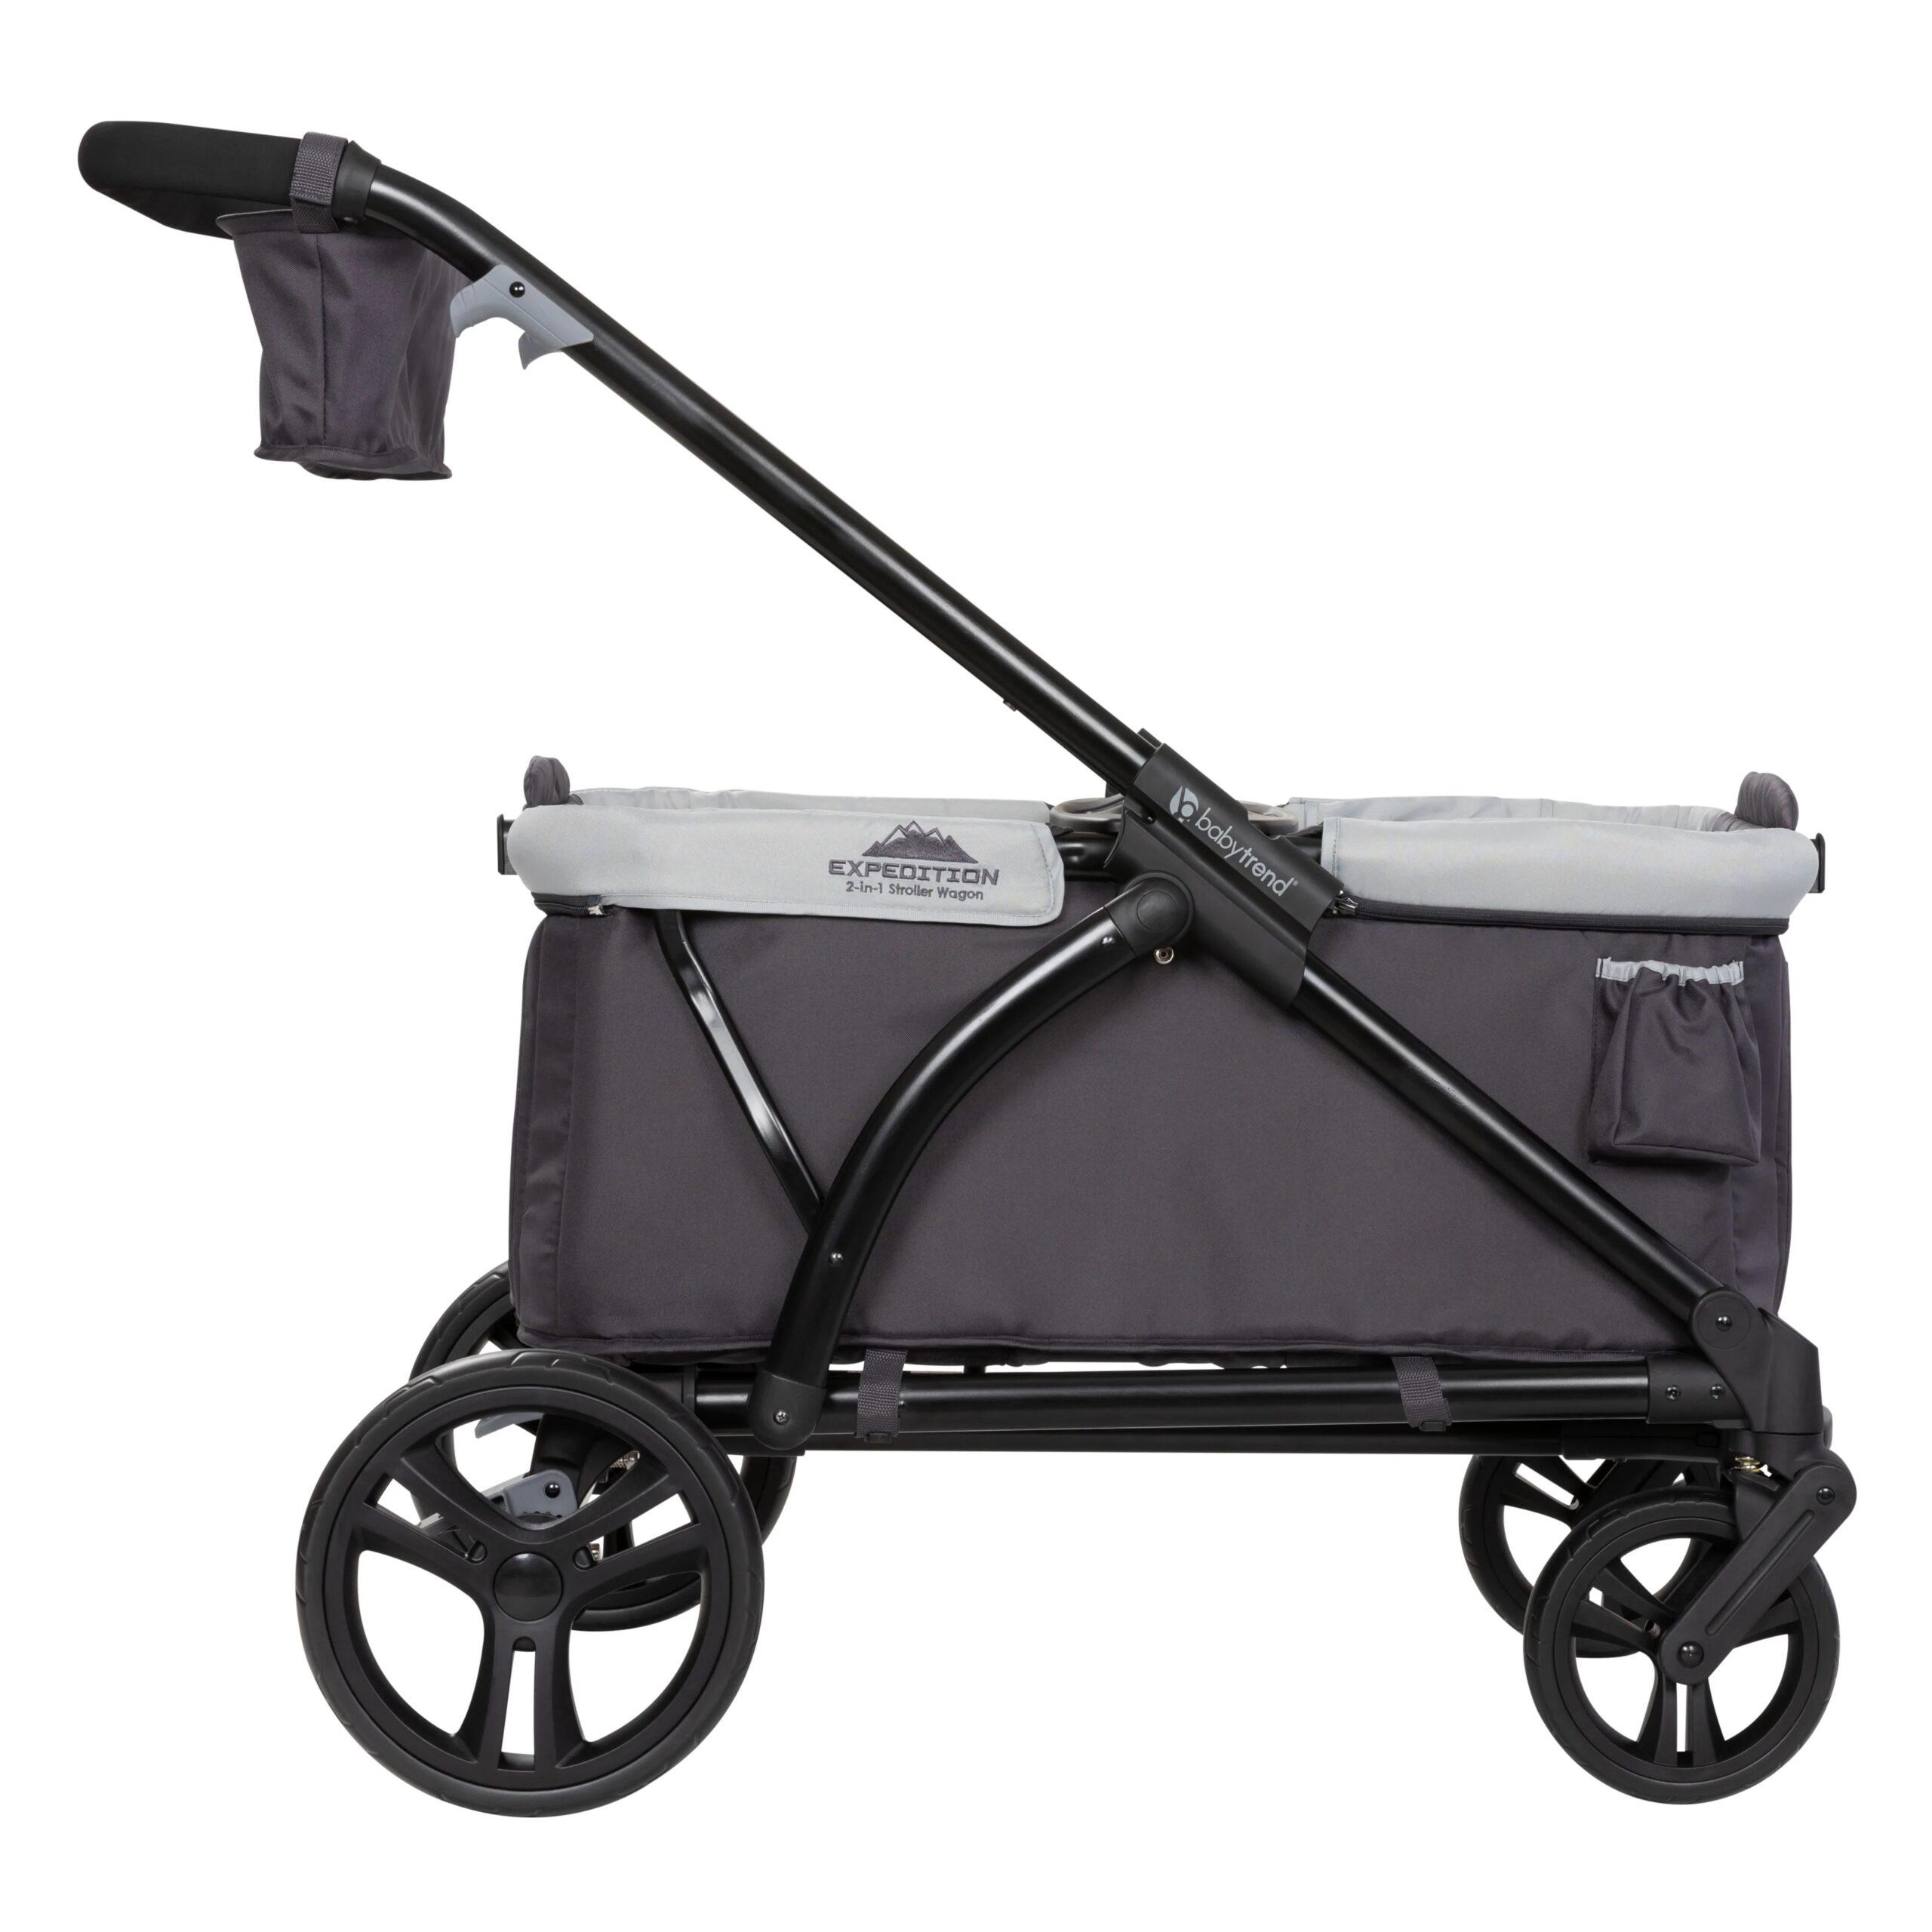 When it comes to uneven terrain, sandy beaches, or rocky mountain trails, a regular stroller just won’t cut it! Thankfully there is a solution that will survive any environment, while also providing extra storage space and convenience. Cue the Wagon Stroller! 1464ea4e baby trend expedition scaled